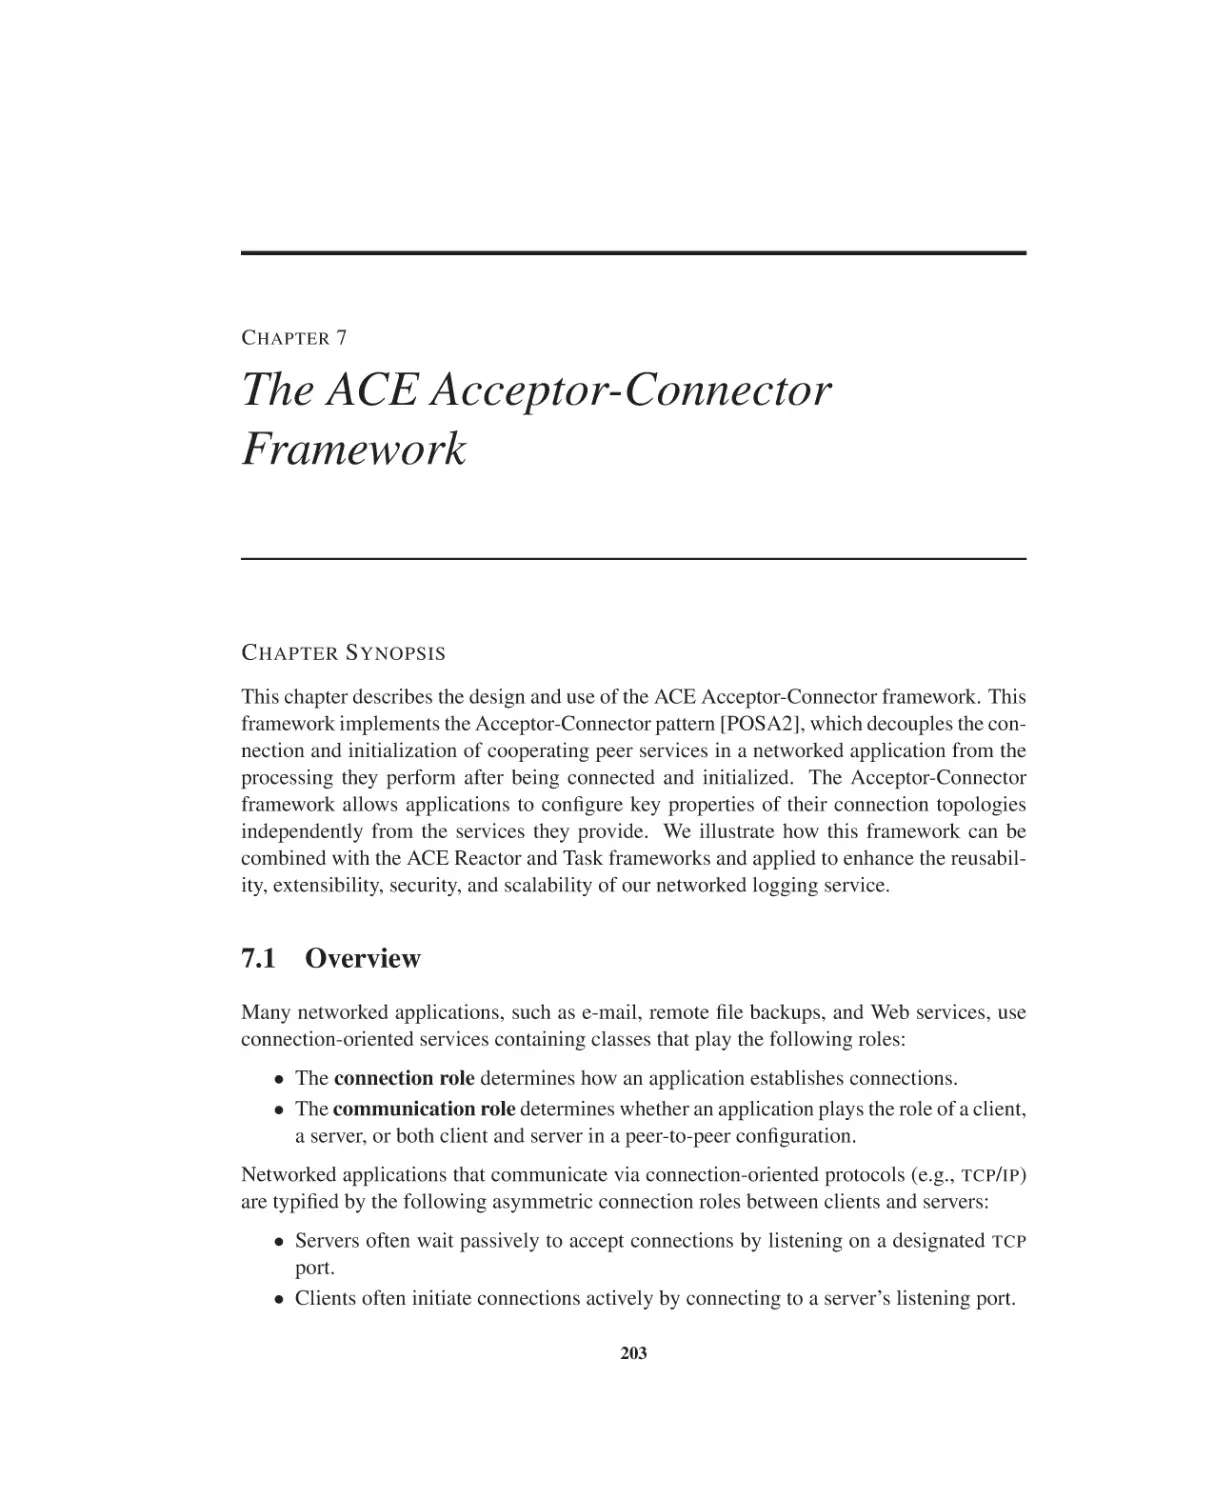 Chapter 7 The ACE Acceptor-Connector Framework
7.1 Overview